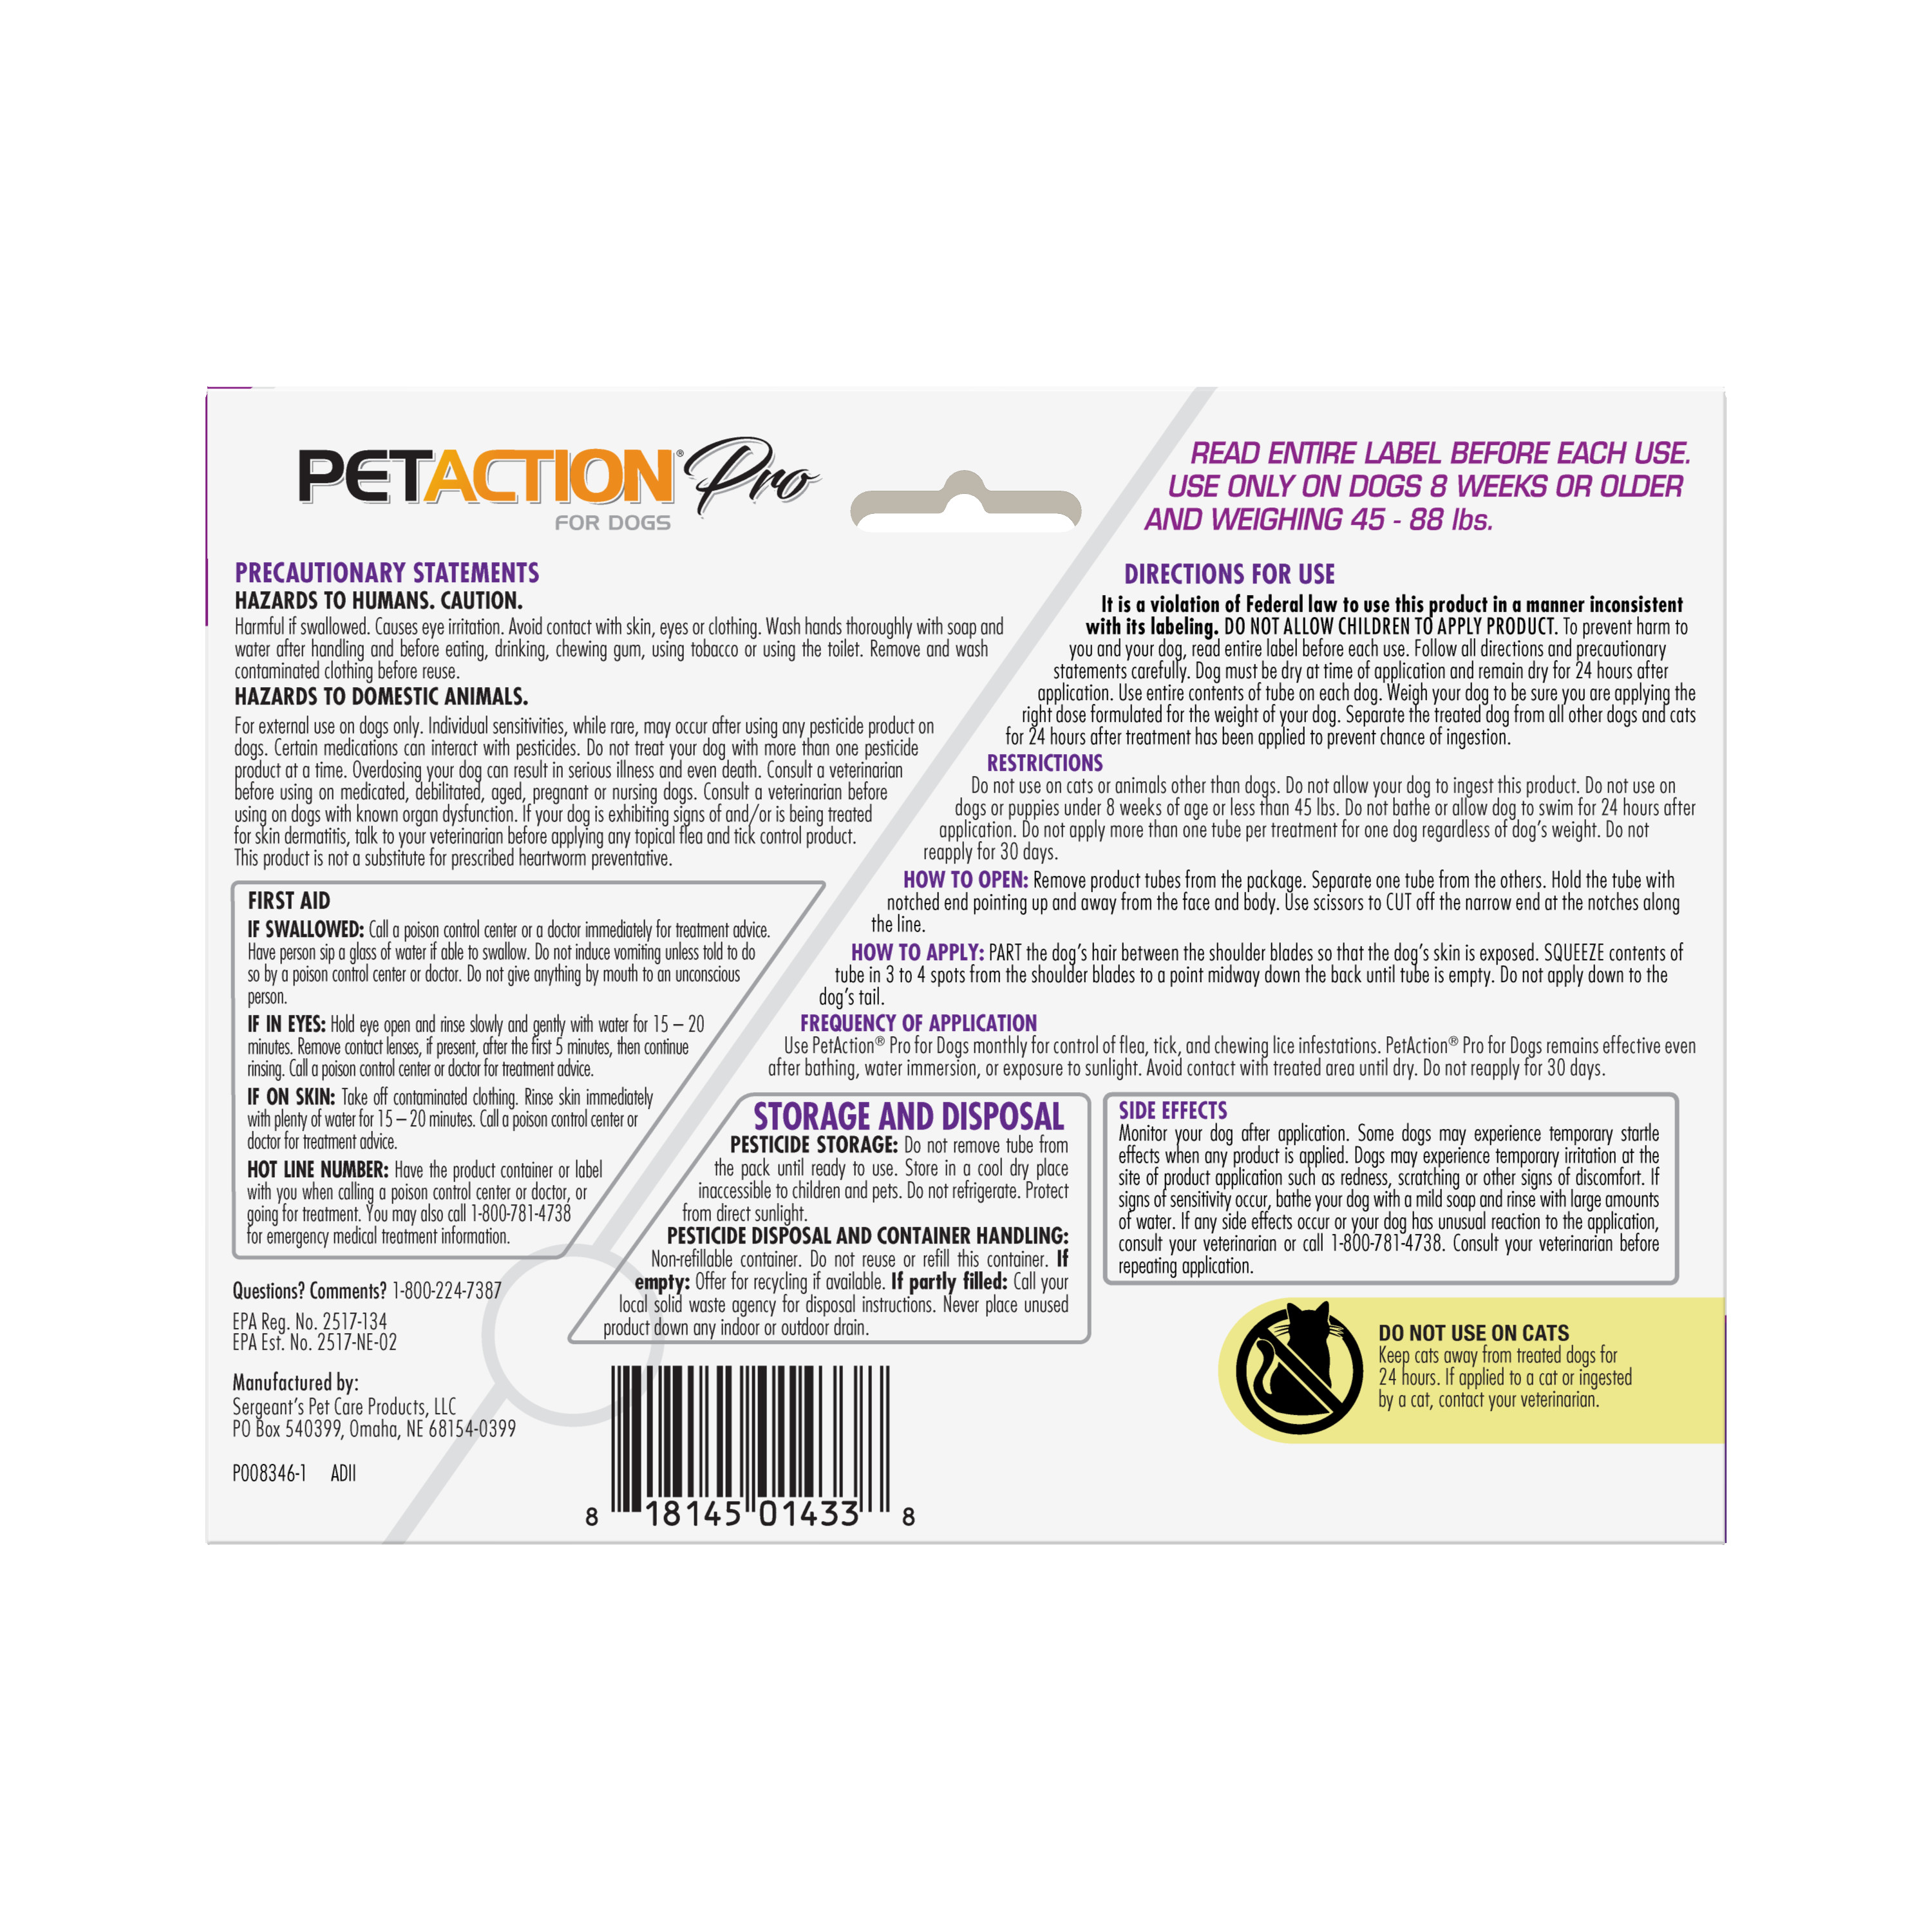 PETACTION PRO Flea & Tick Topical Treatment for Dogs 45-88 lbs, 3 Count - image 2 of 9